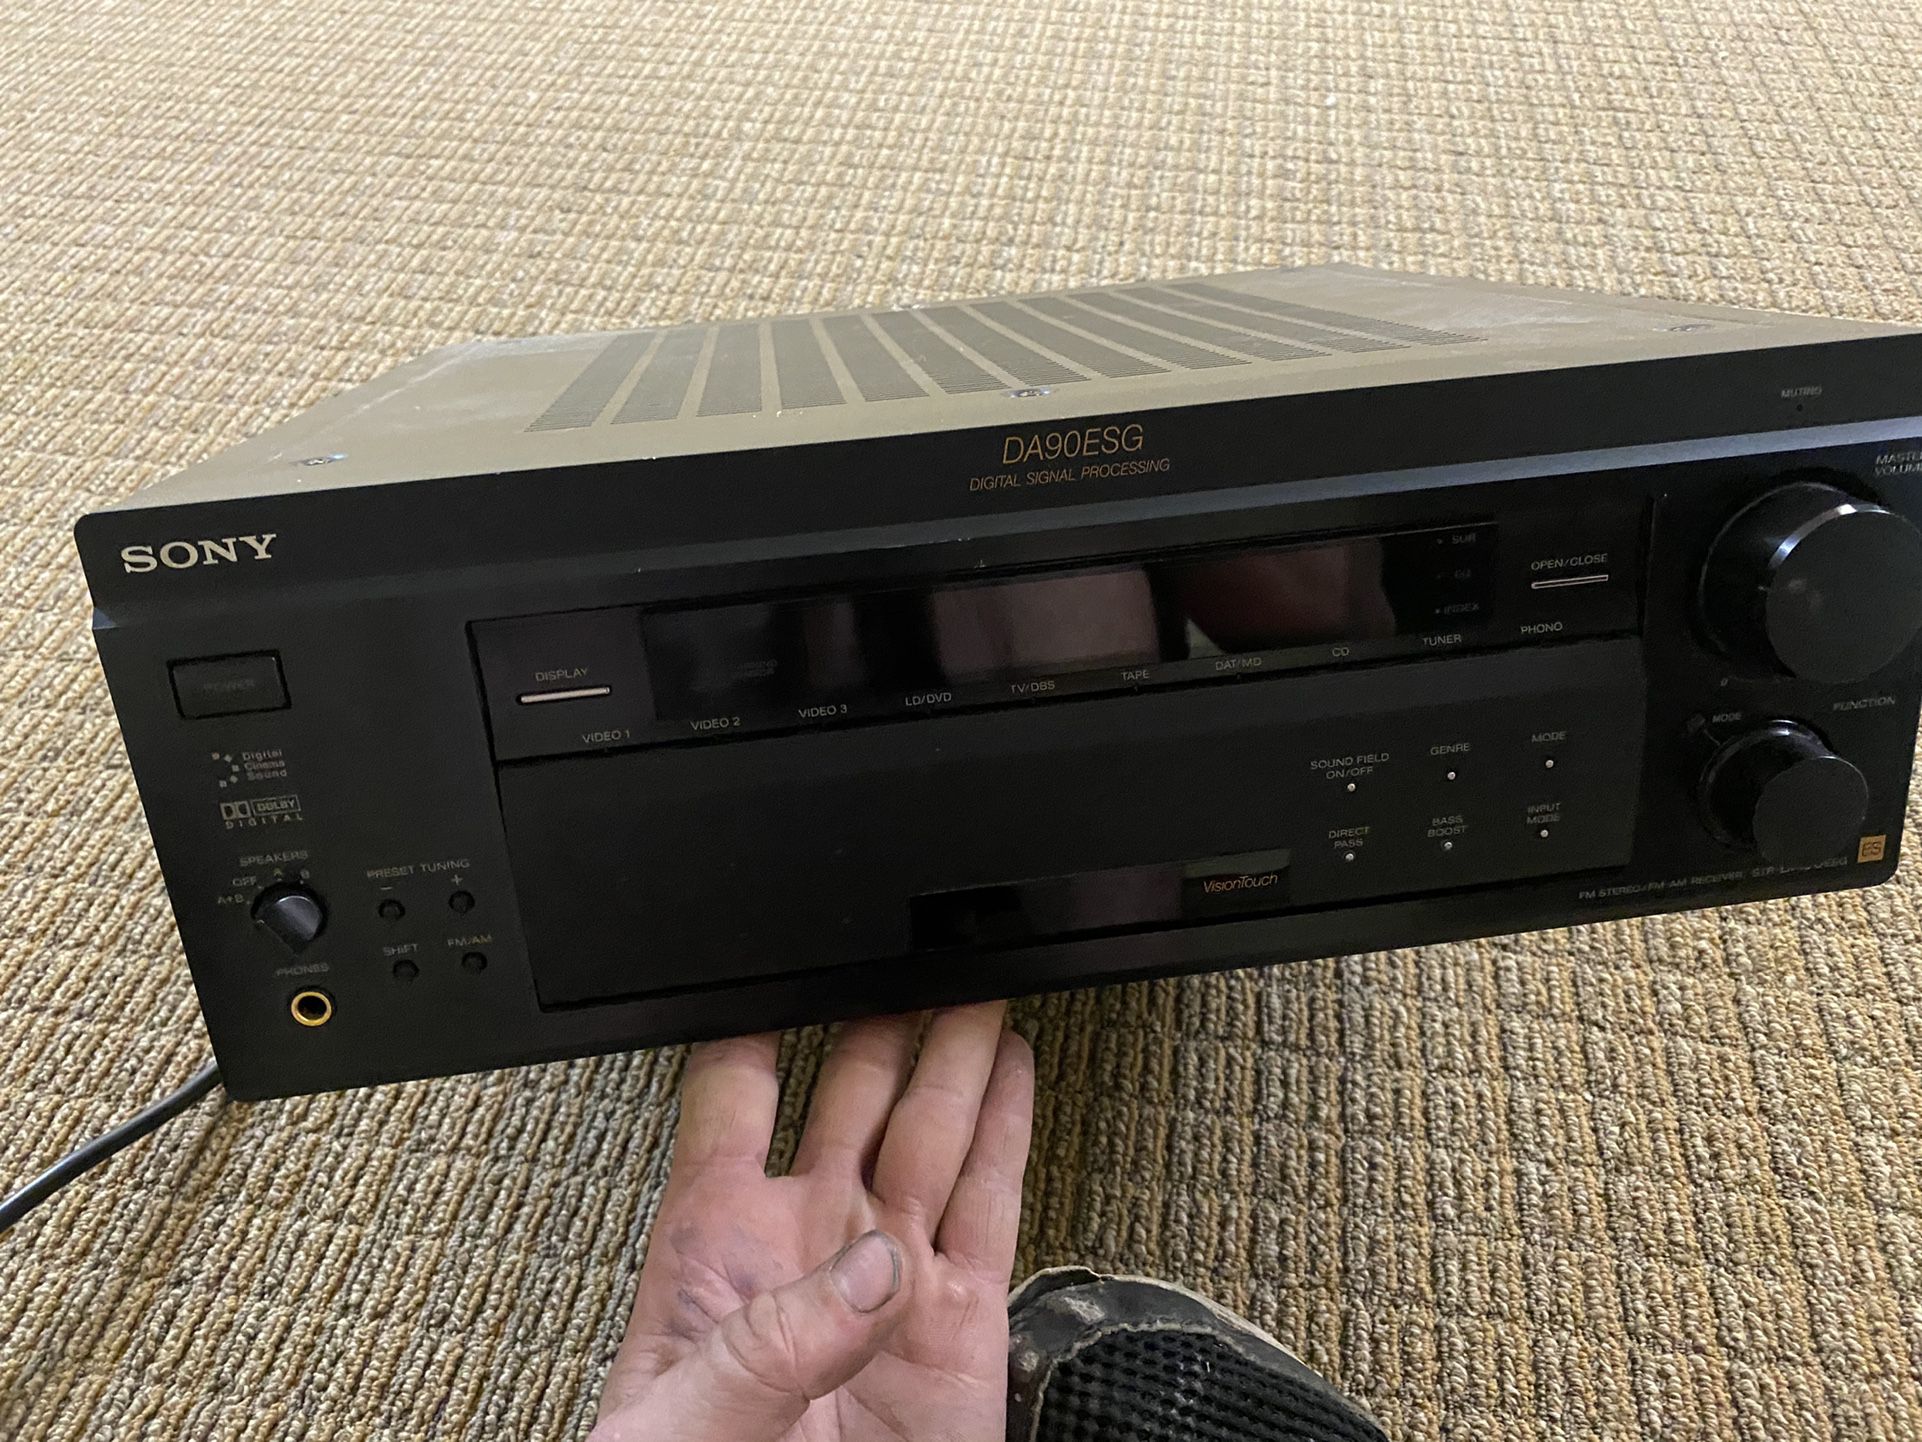 Commercial stereo equipment make me an offer if there’s one you like